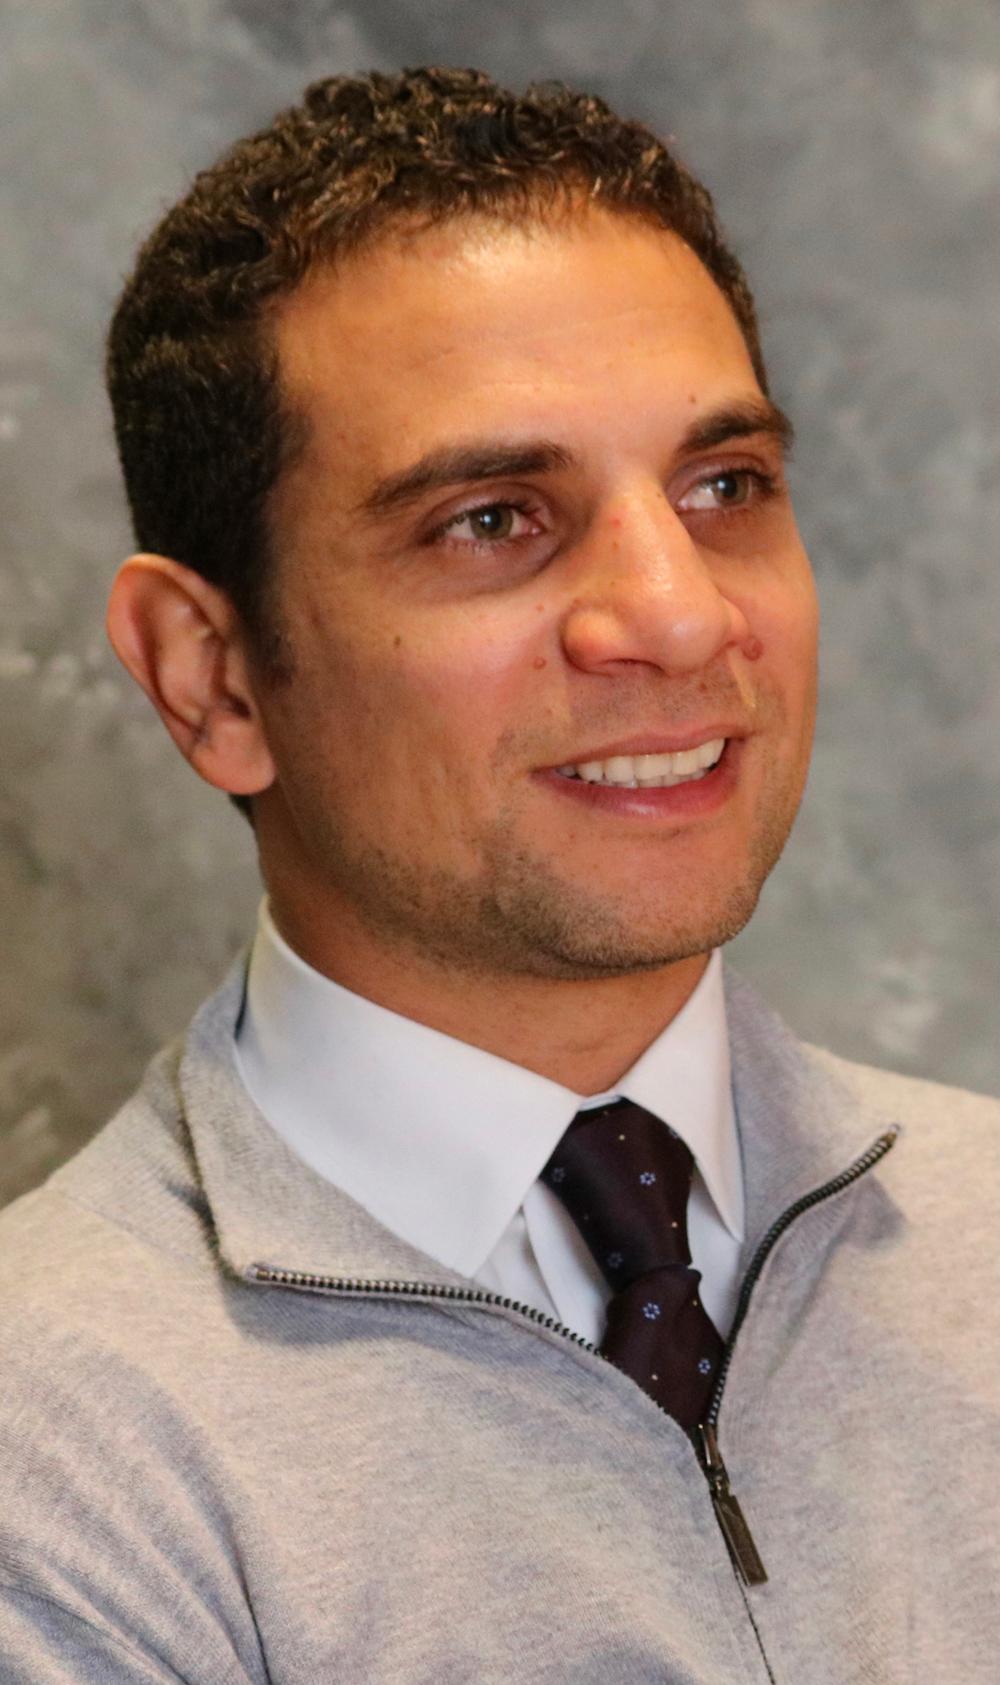 Joseph Jacob, MD, specializes in treating urological cancers at Upstate.